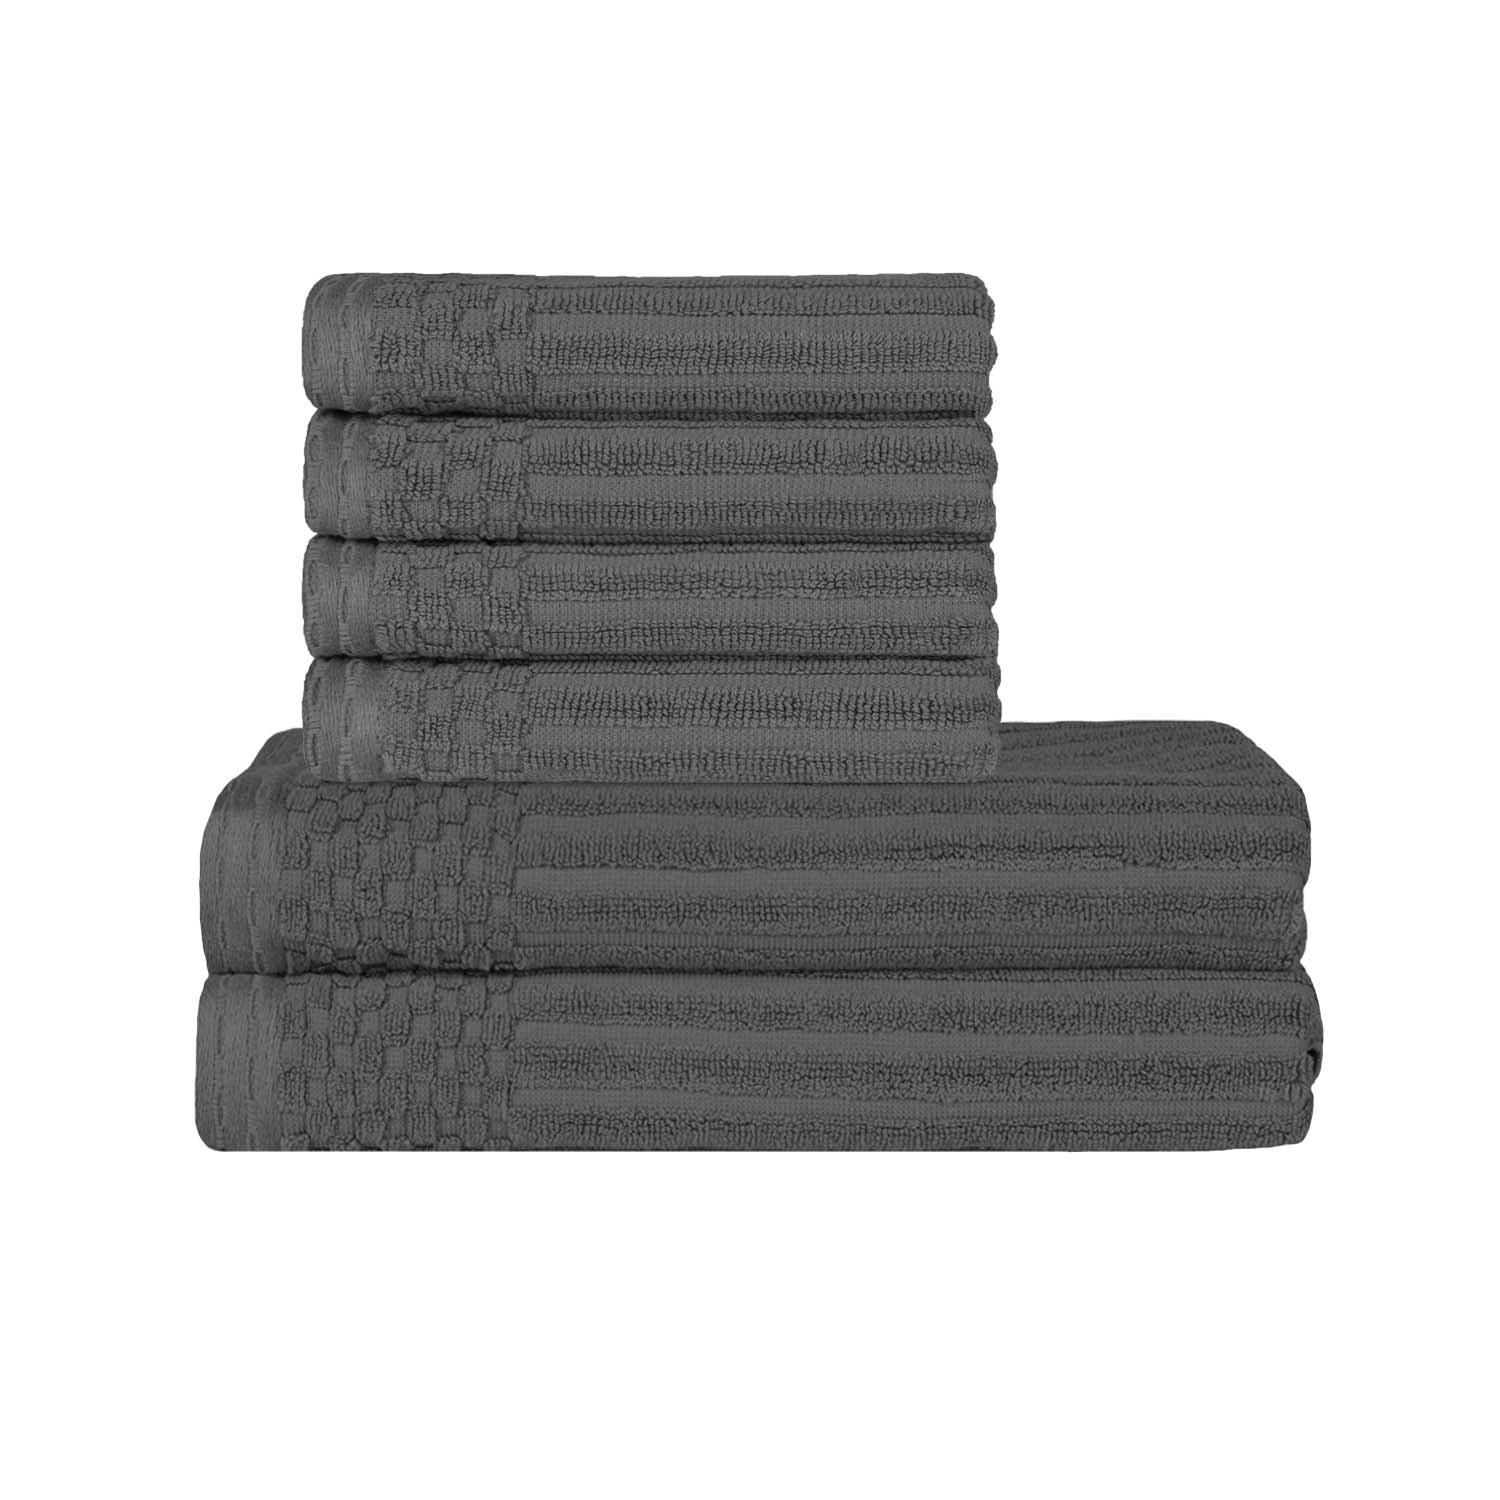  Superior Soho Ribbed Textured Cotton Ultra-Absorbent Hand and Bath Towel Set - Charcoal